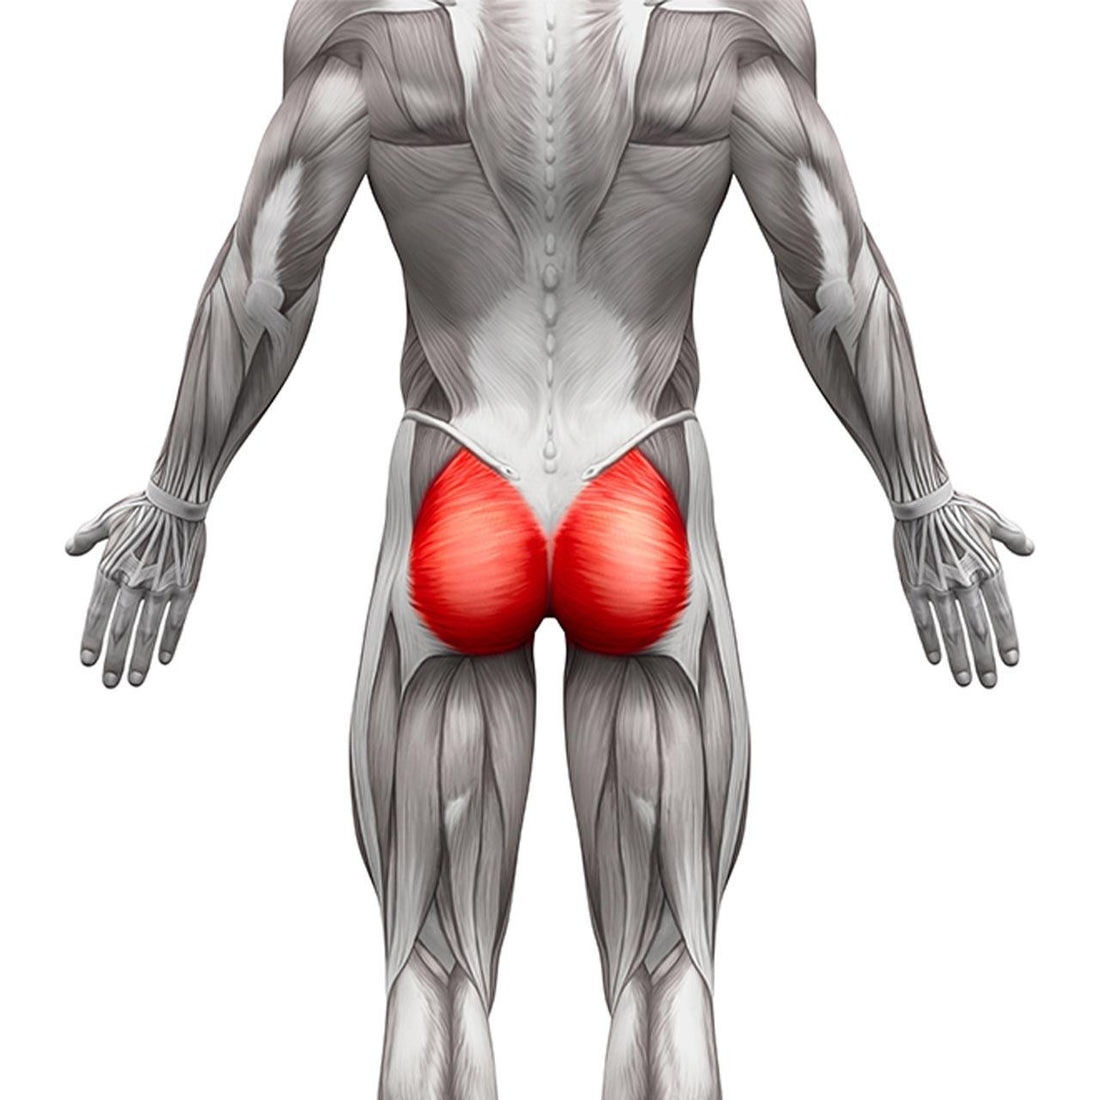 Want Gigantic Glutes? Avoid Making These 6 Mistakes (2016)